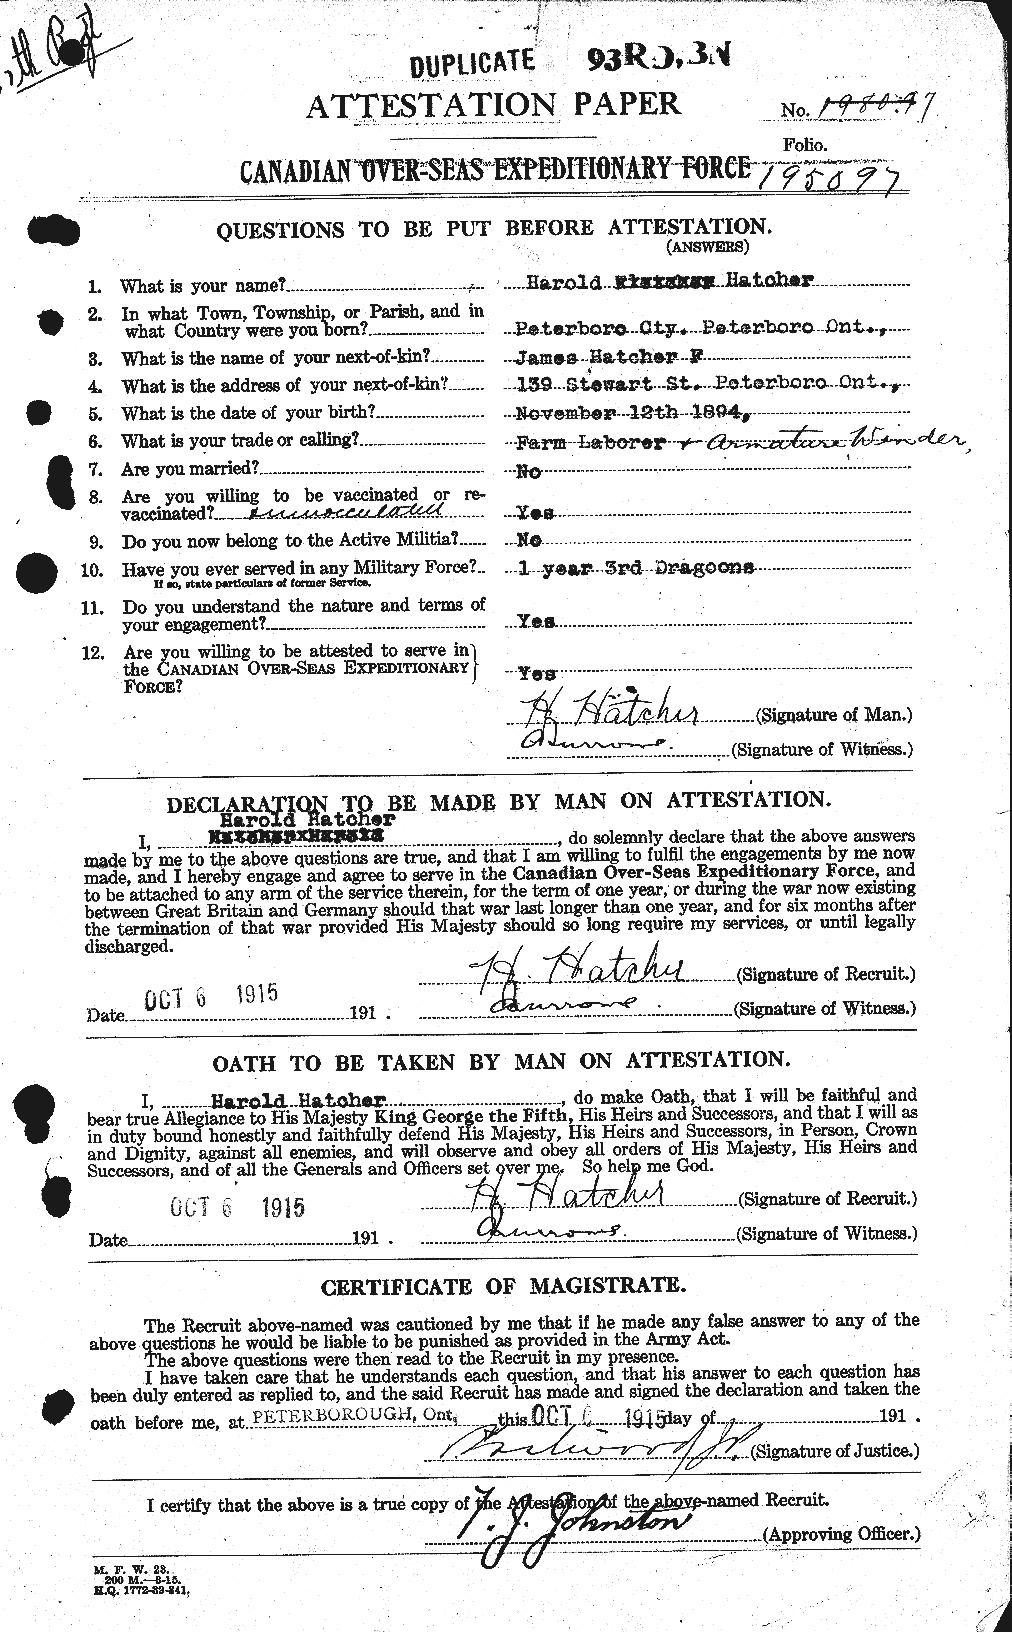 Personnel Records of the First World War - CEF 388743a